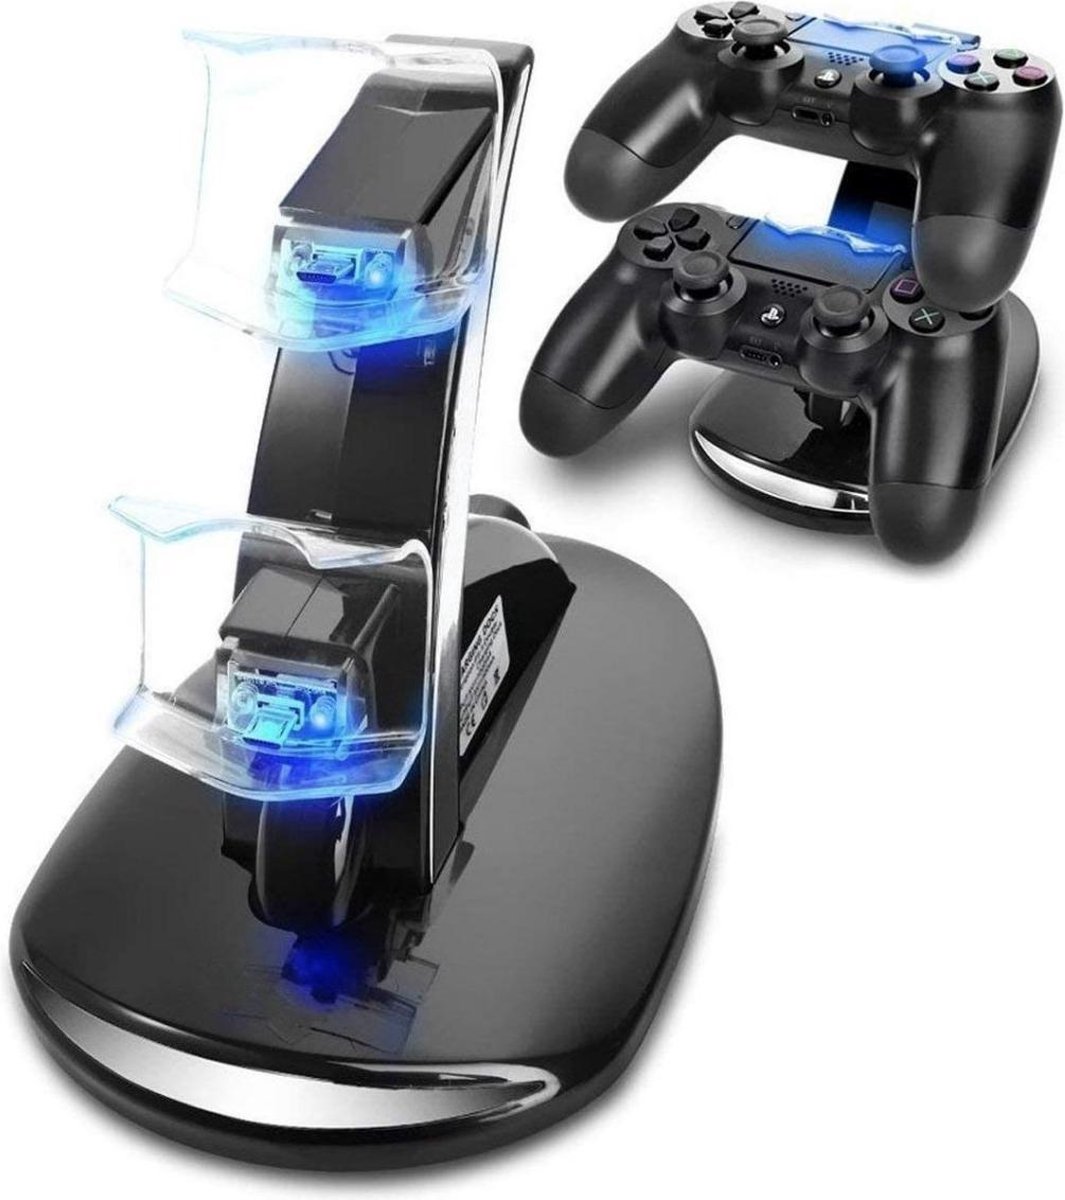 mimd Charging Dock - Oplader Stand for Controllers - Console Dock Station - Geschikt voor PS4 - mimd